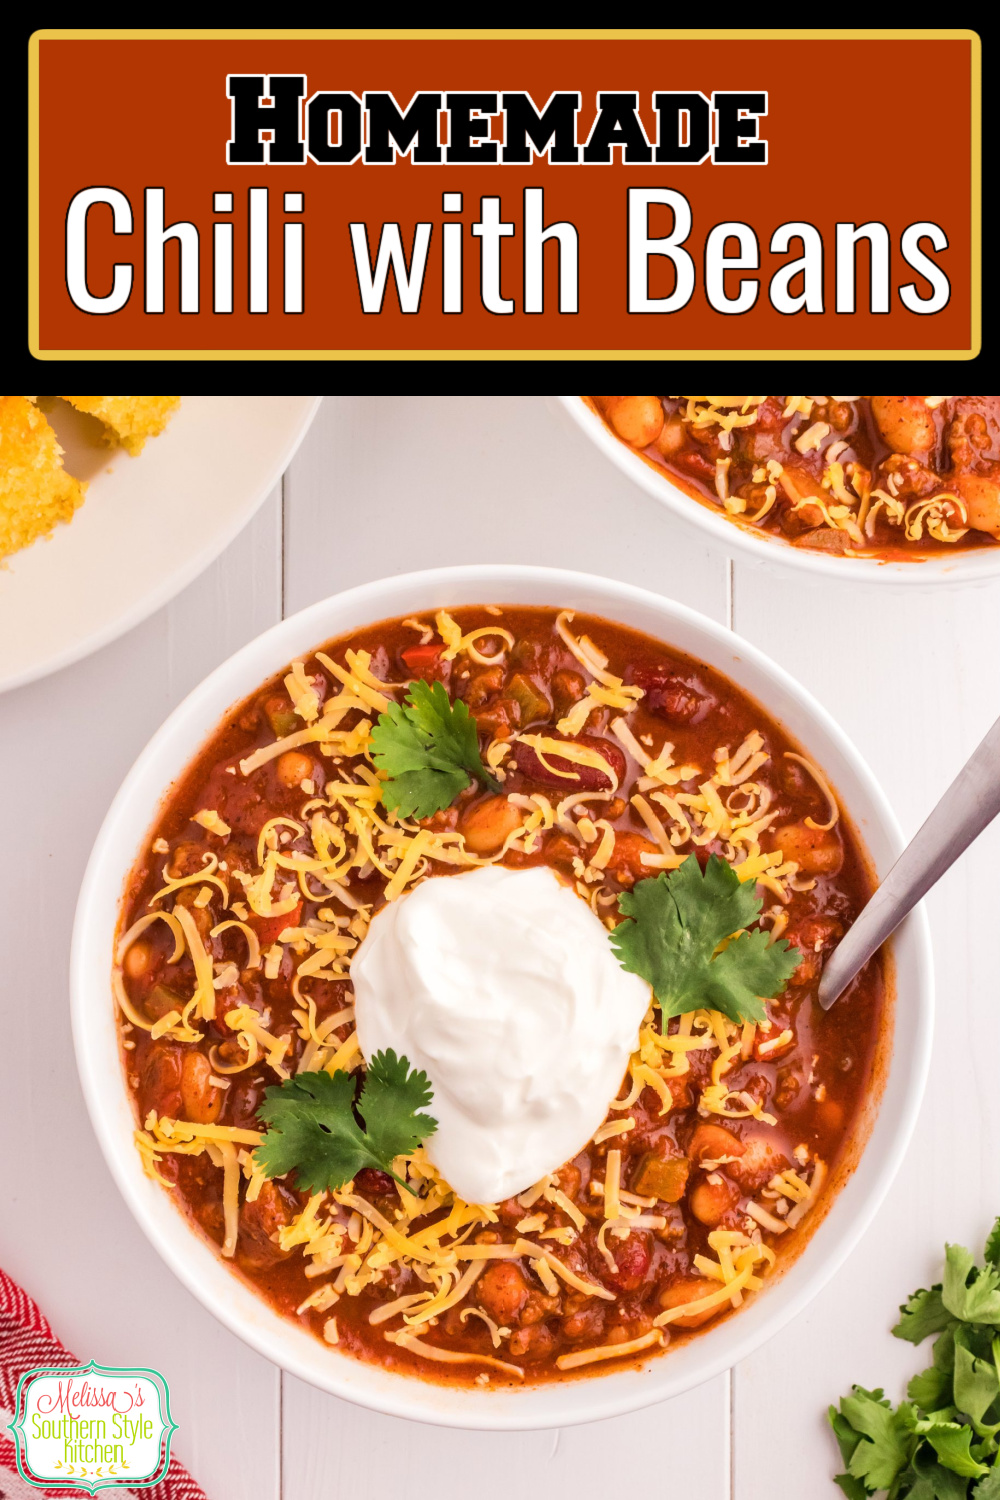 Top this Chili with Beans recipe with your favorite fixings and add a side of cornbread for a homestyle supper any day of the week. #chili #chilibeans #chilirecipes #easygroundbeefrecipes #bestchilirecipes #easydinnerrecipes #beans via @melissasssk